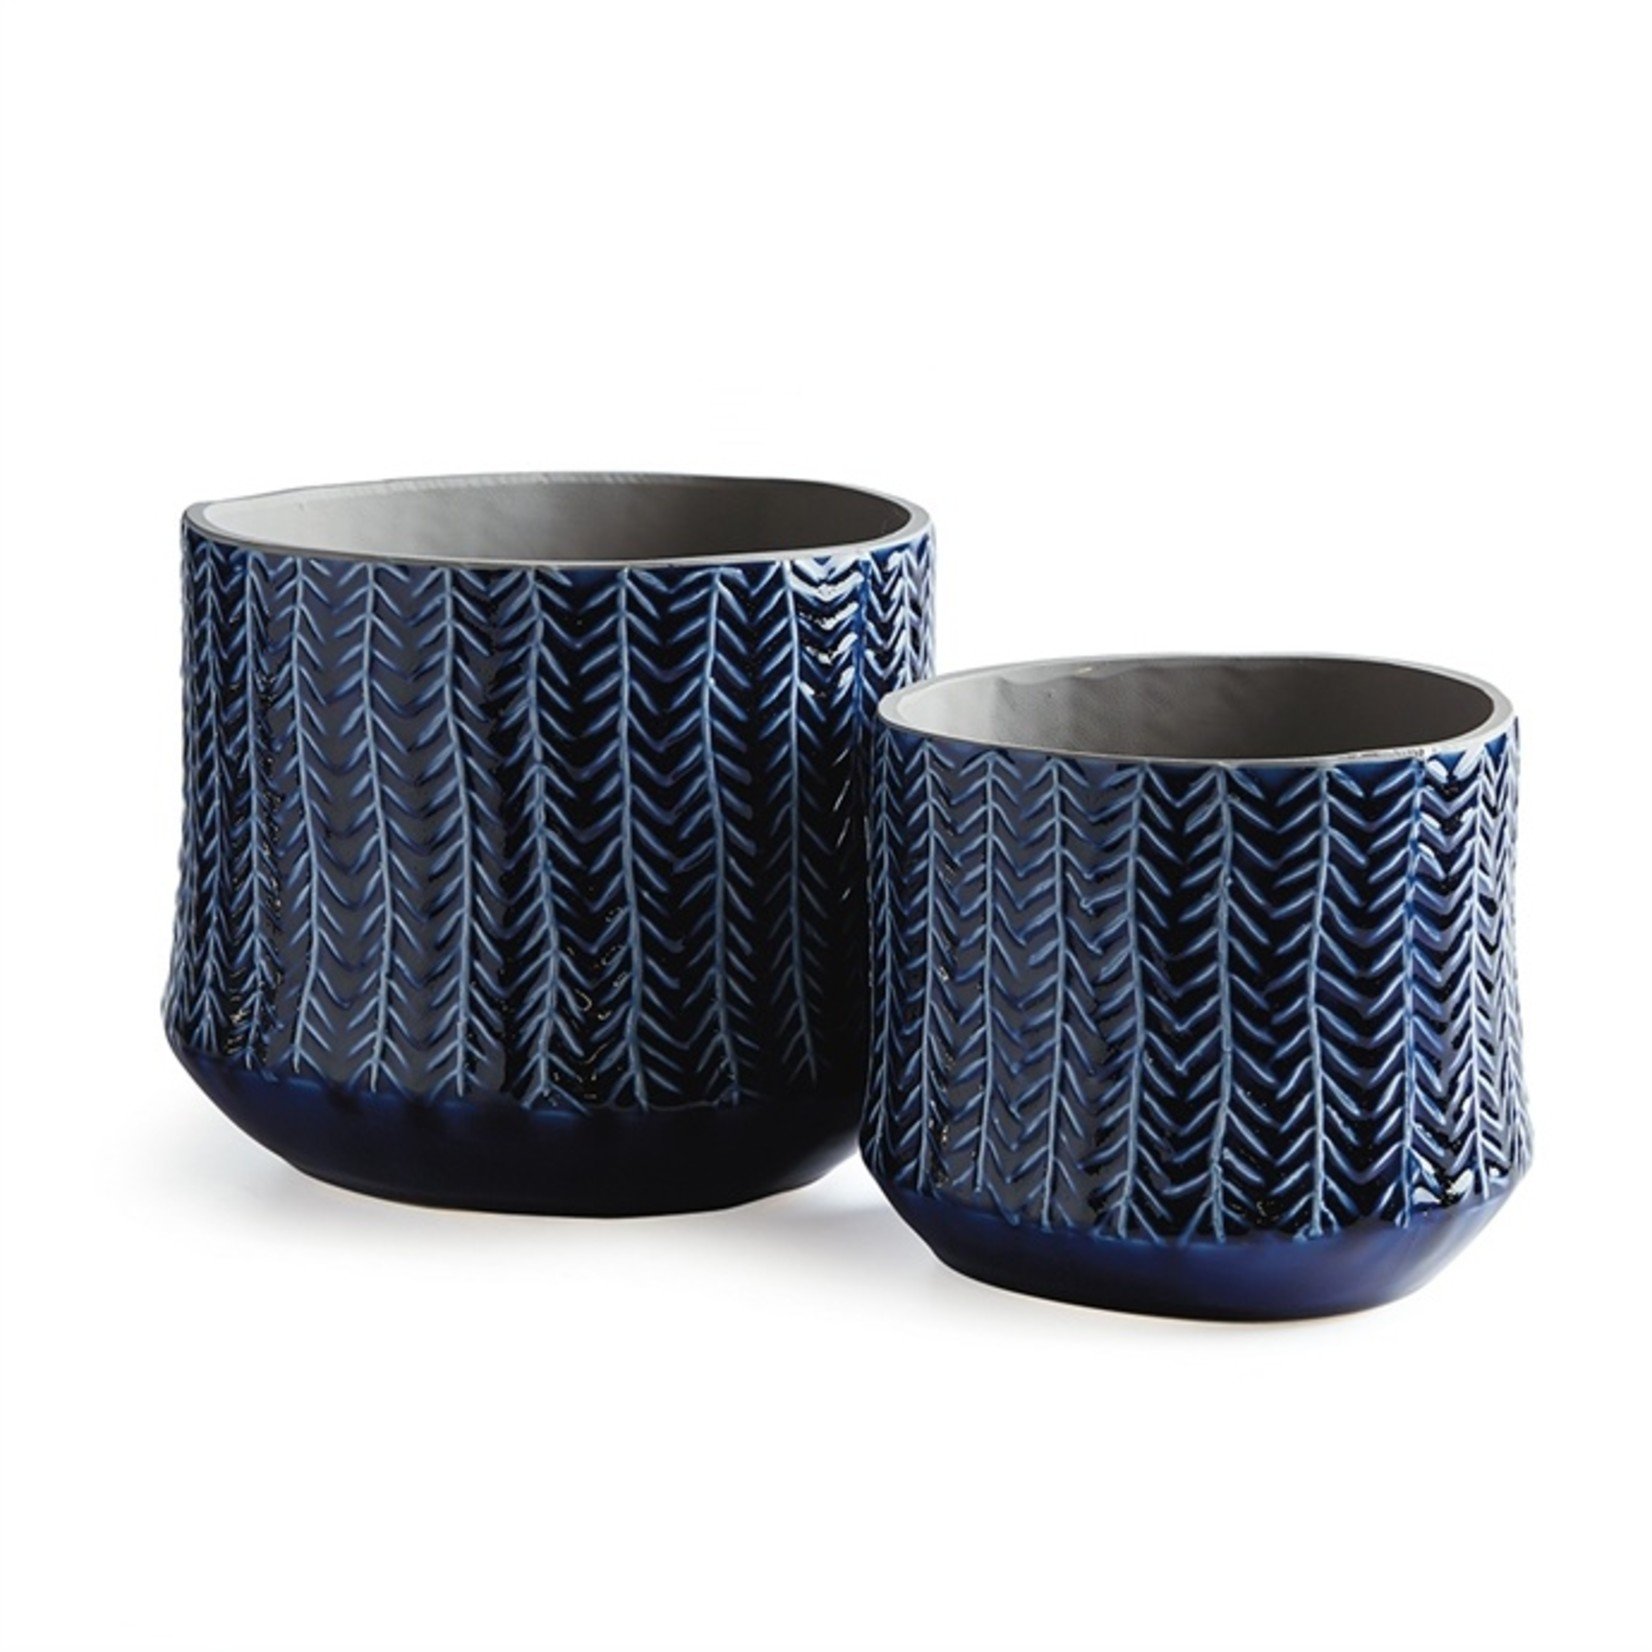 Napa Home and Garden Frasier Pots in Blue